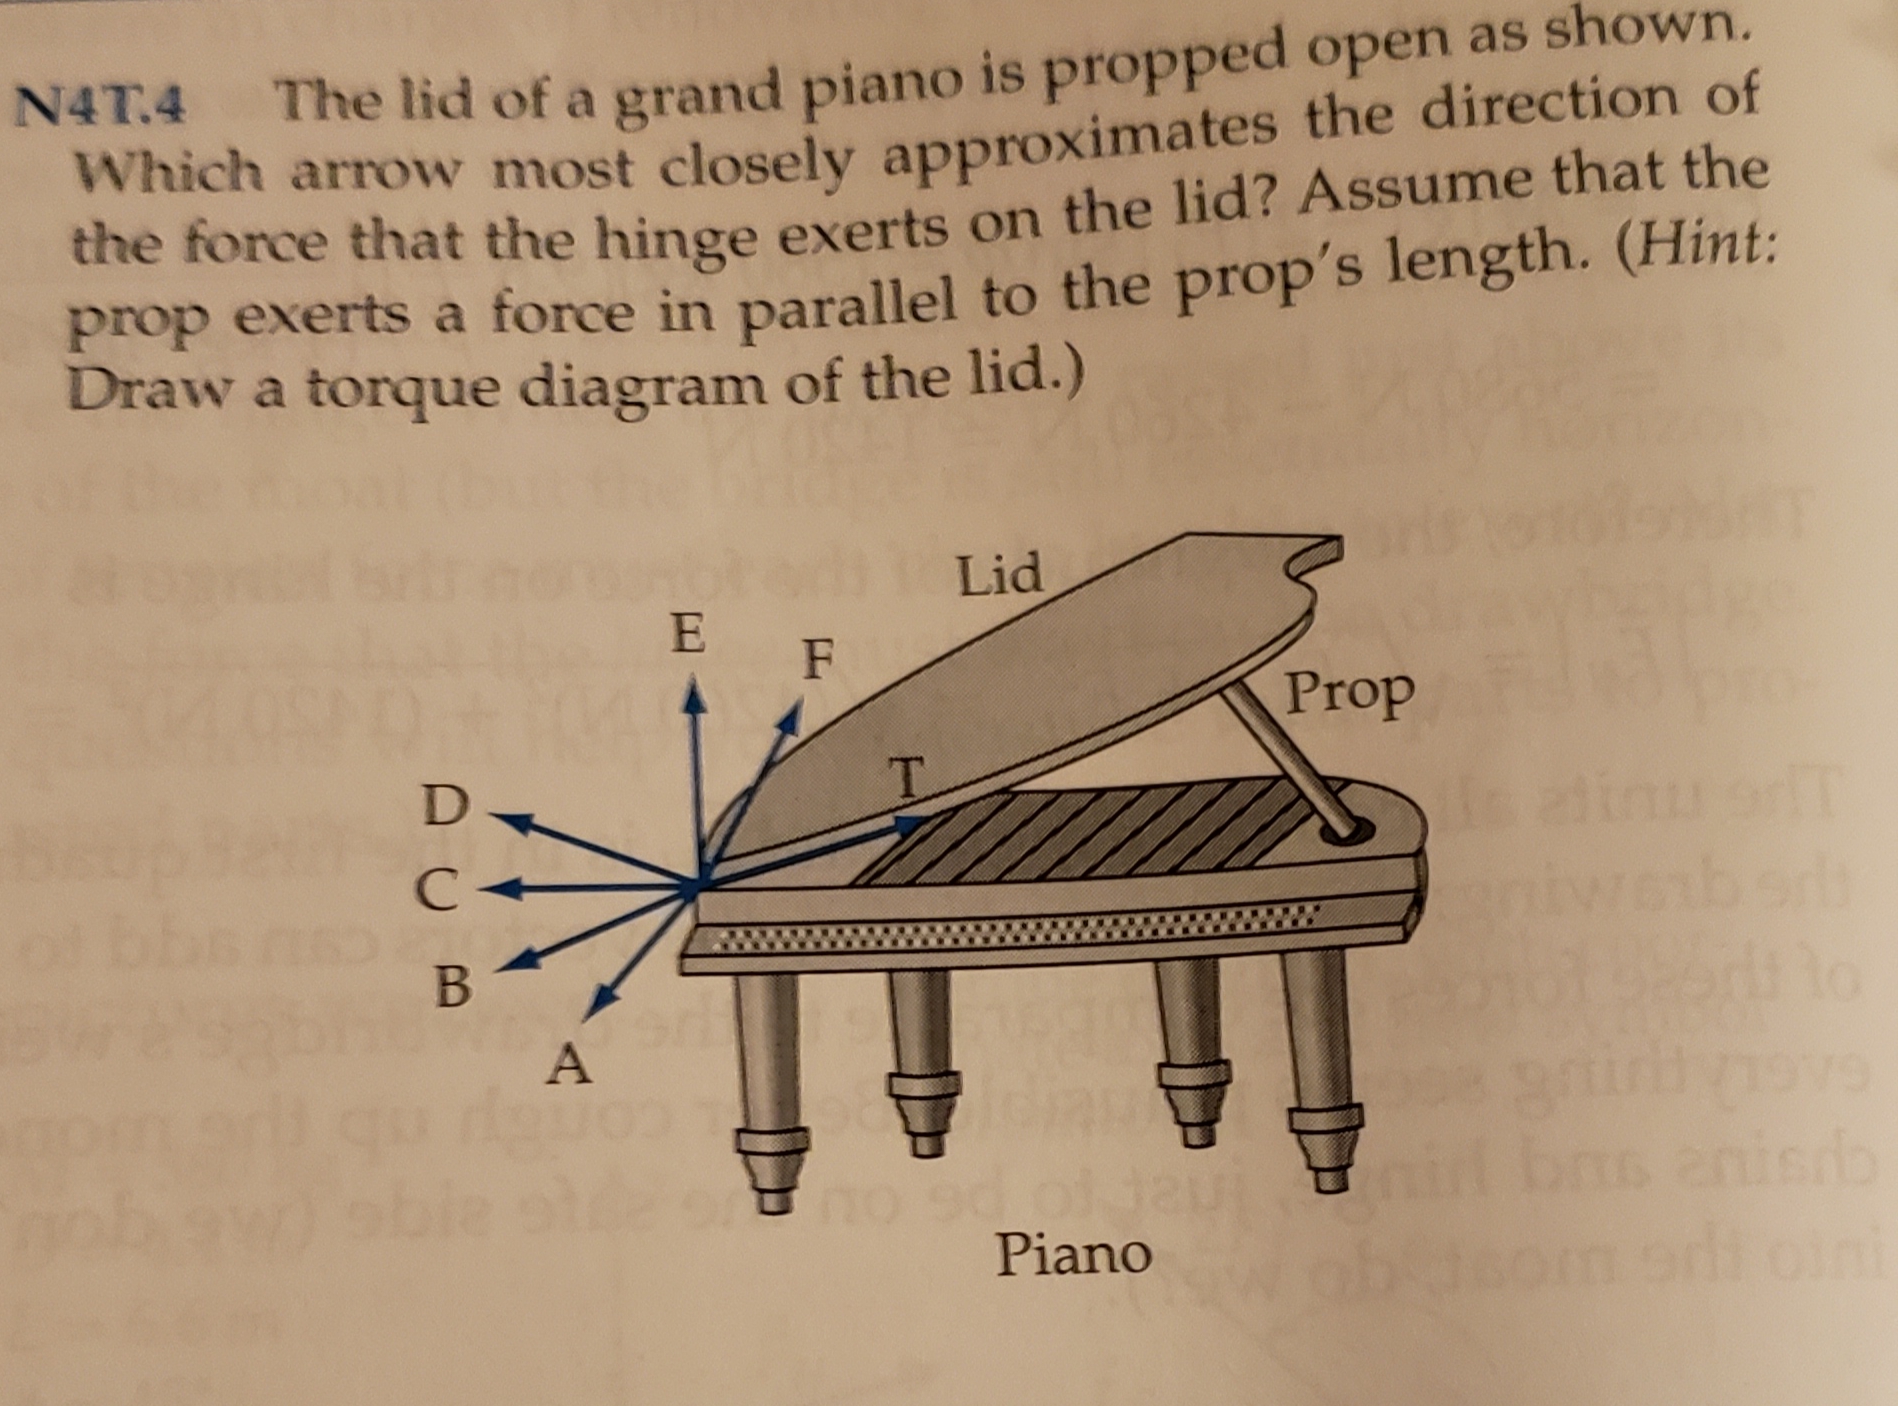 The lid of a grand piano is propped open as shown.
Which arrow most closely approximates the direction of
the force that the hinge exerts on the lid? Assume that the
prop exerts a force in parallel to the prop's length. (Hint:
Draw a torque diagram of the lid.)
N4T.4
Lid
E
F
Prop
T
D
с-
В
02
nis do
oni
9o
Piano
